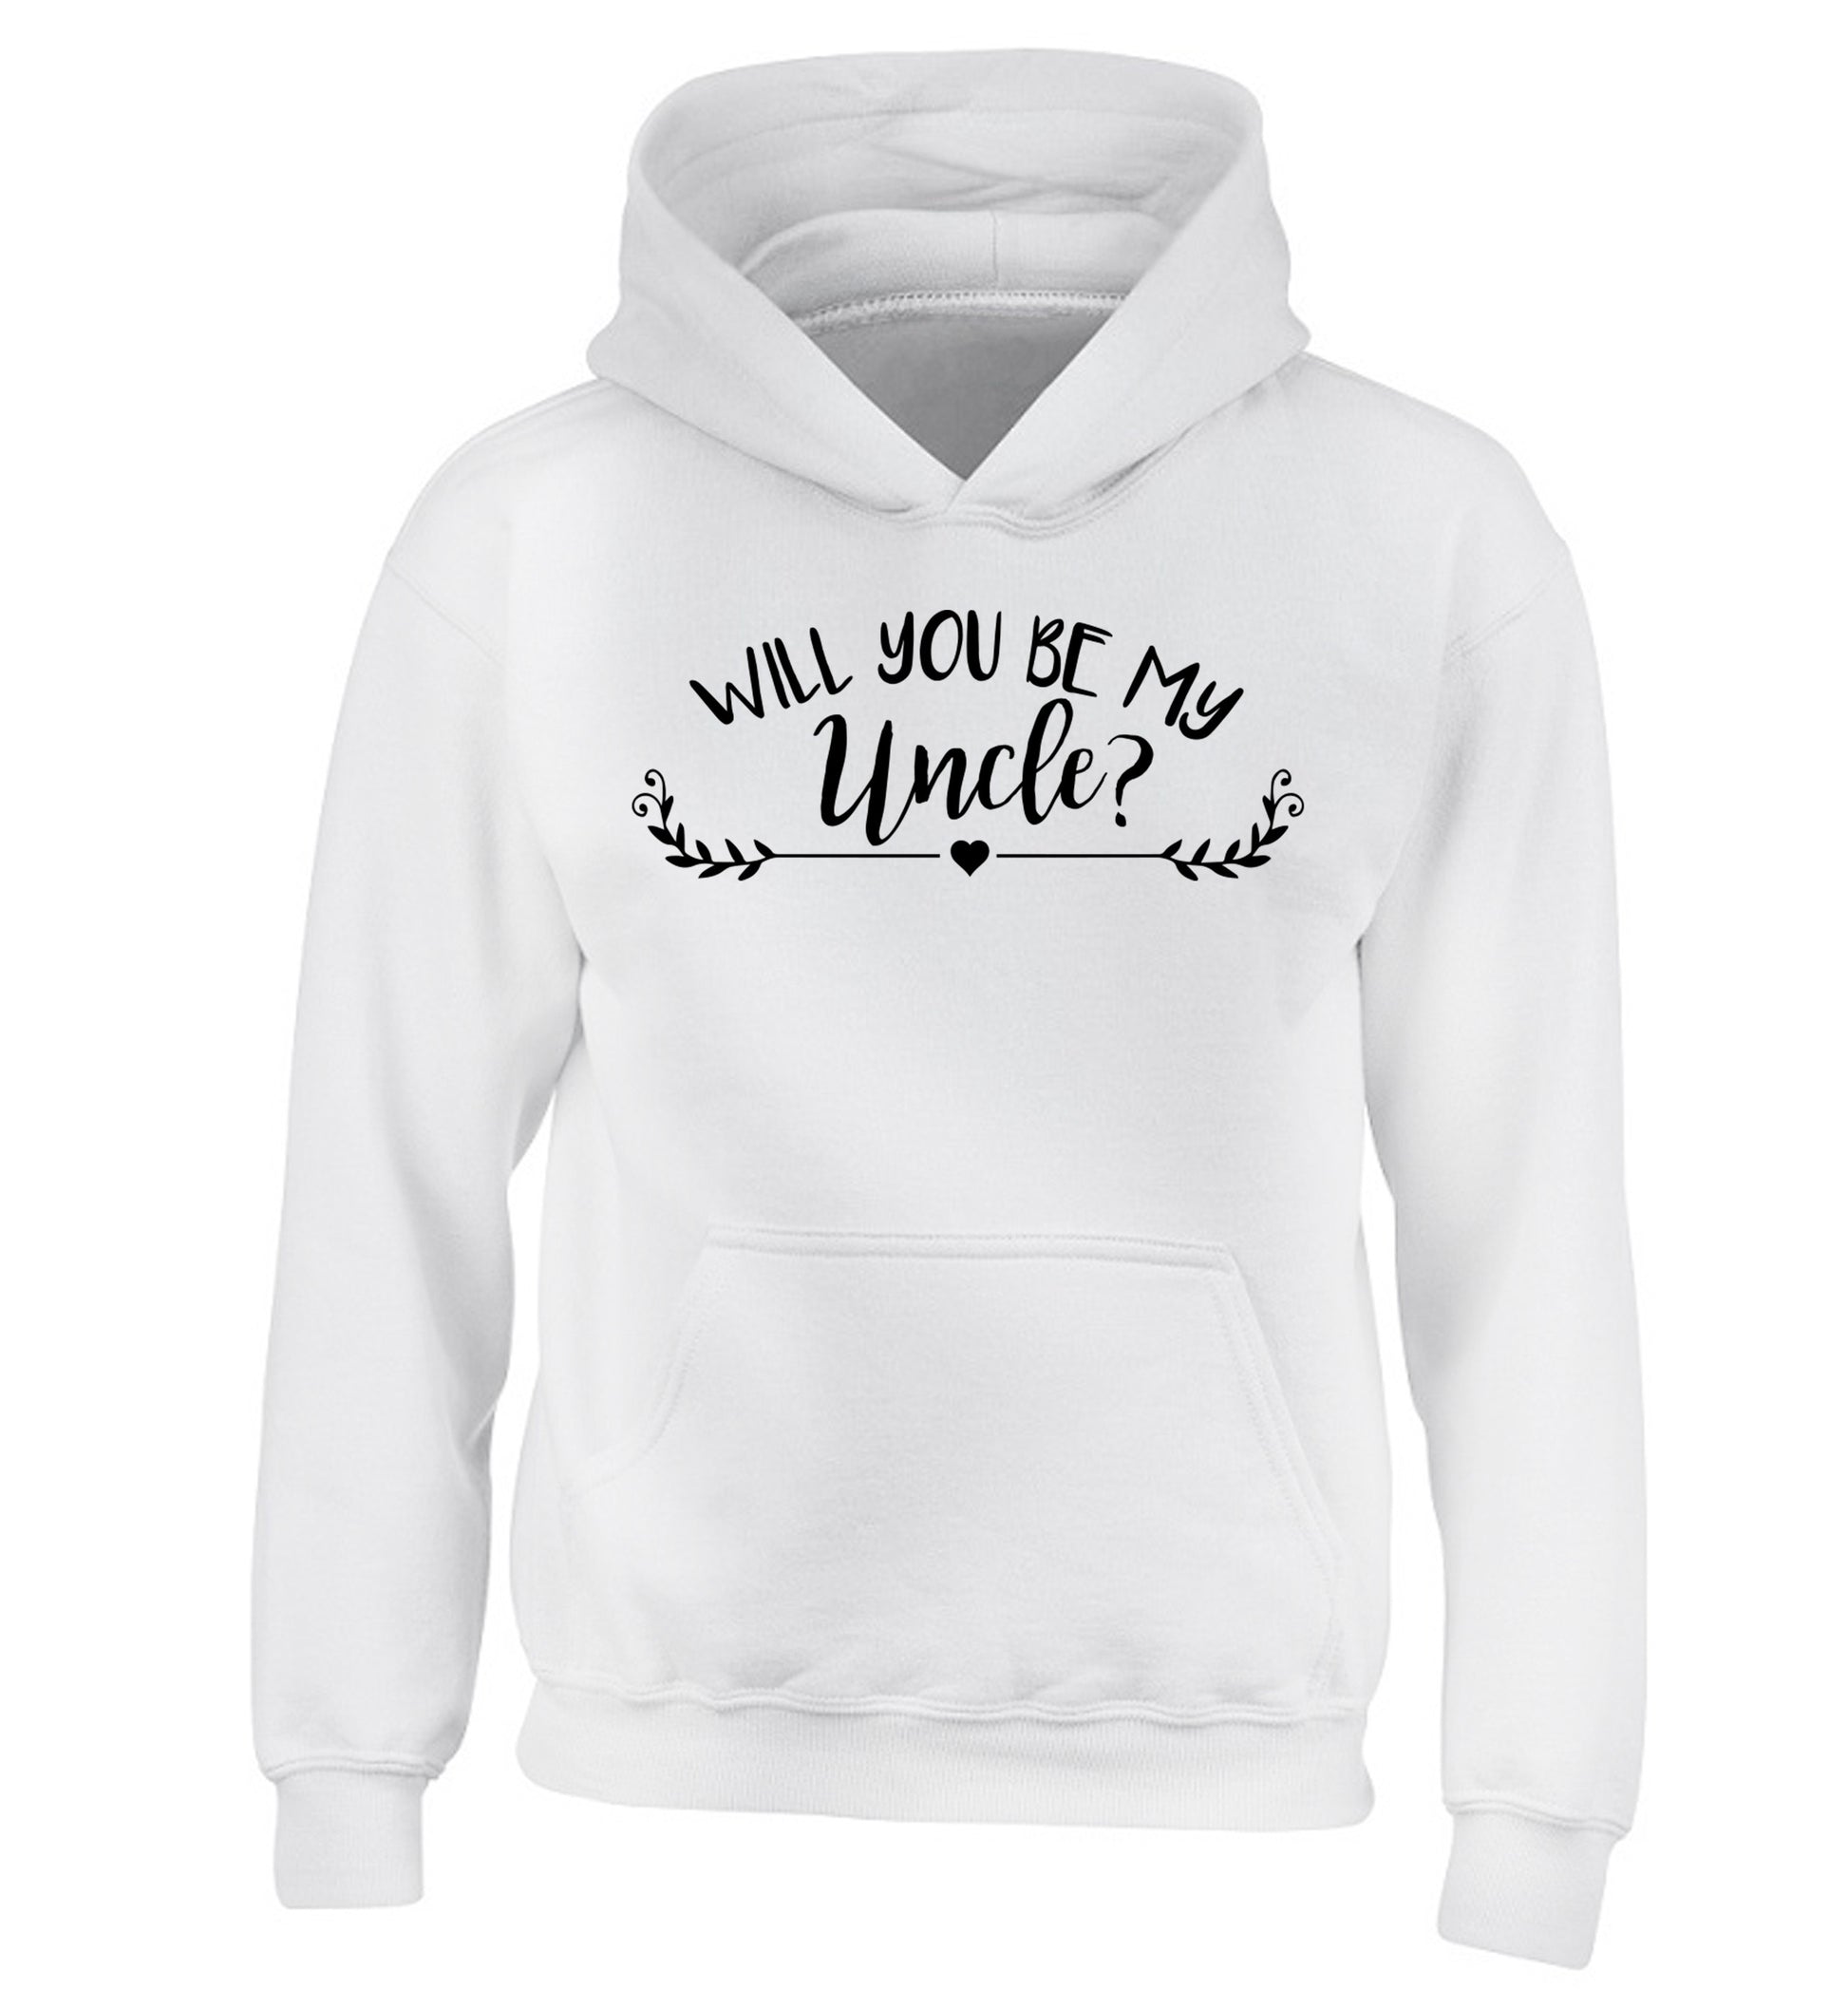 Will you be my uncle? children's white hoodie 12-14 Years